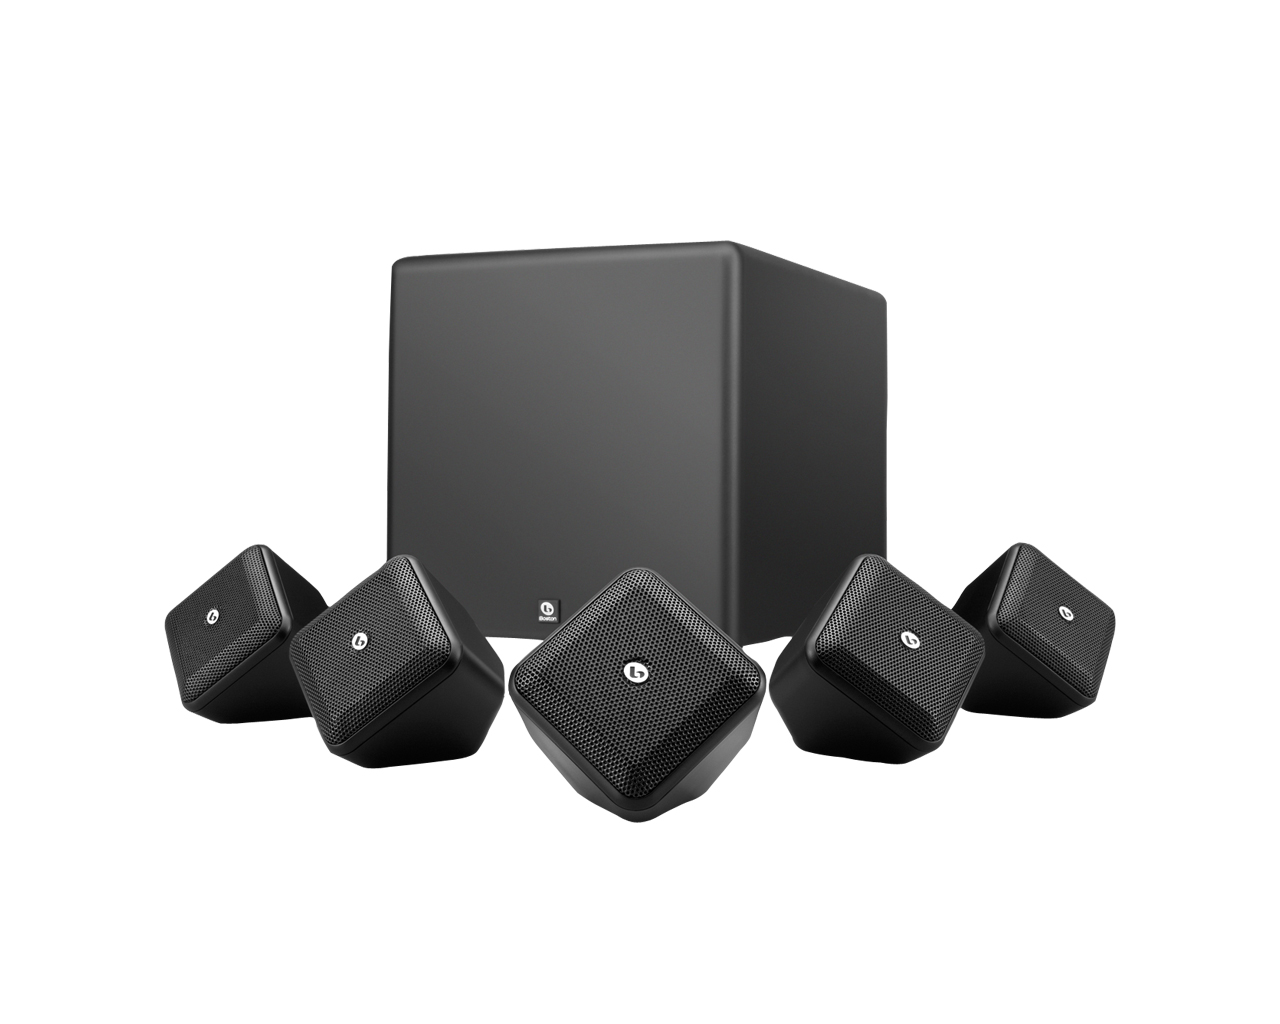 SoundWare XS 5.1 Home Theater System